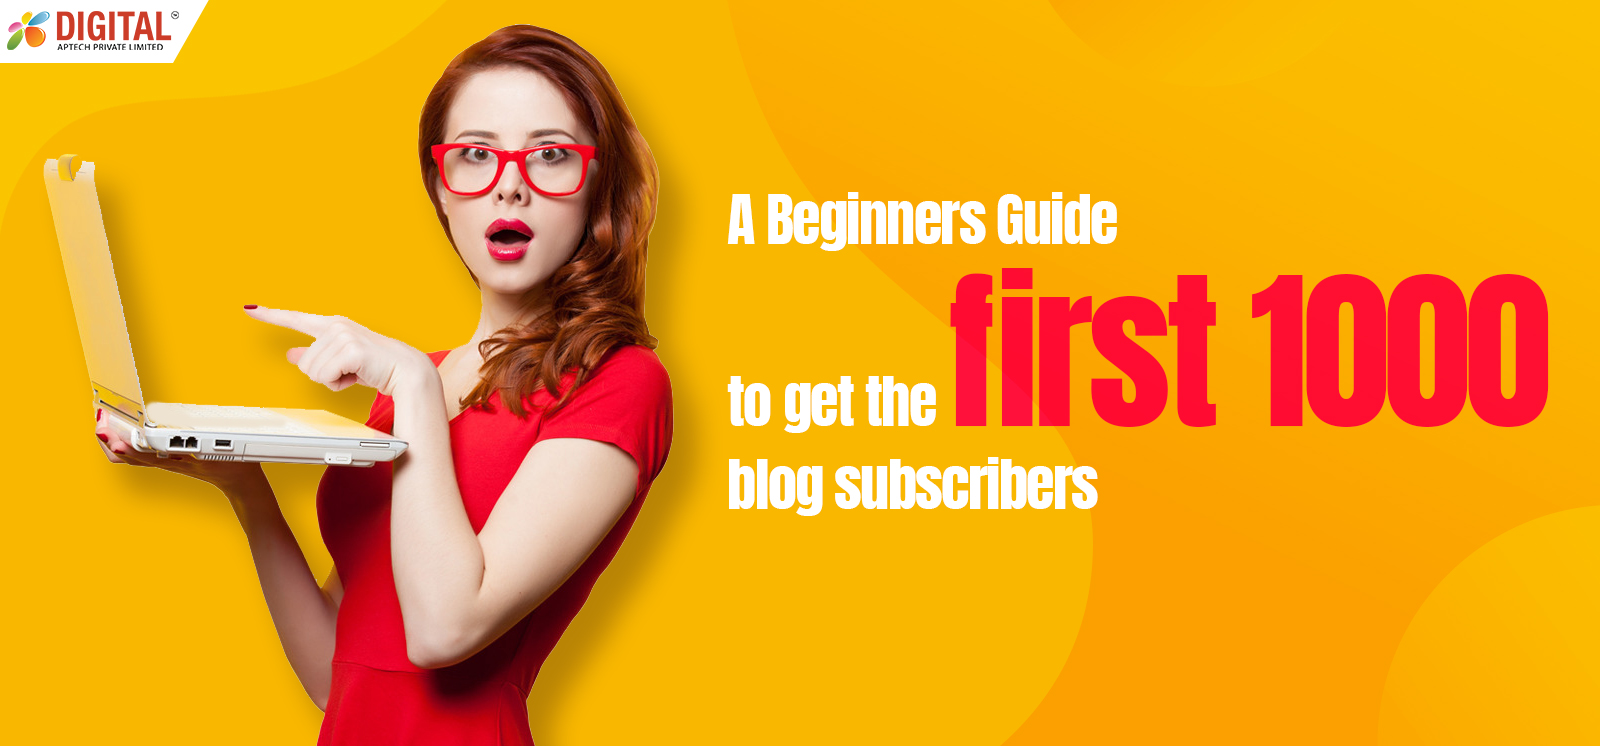 A Beginners Guide to get the first 1000 blog subscribers